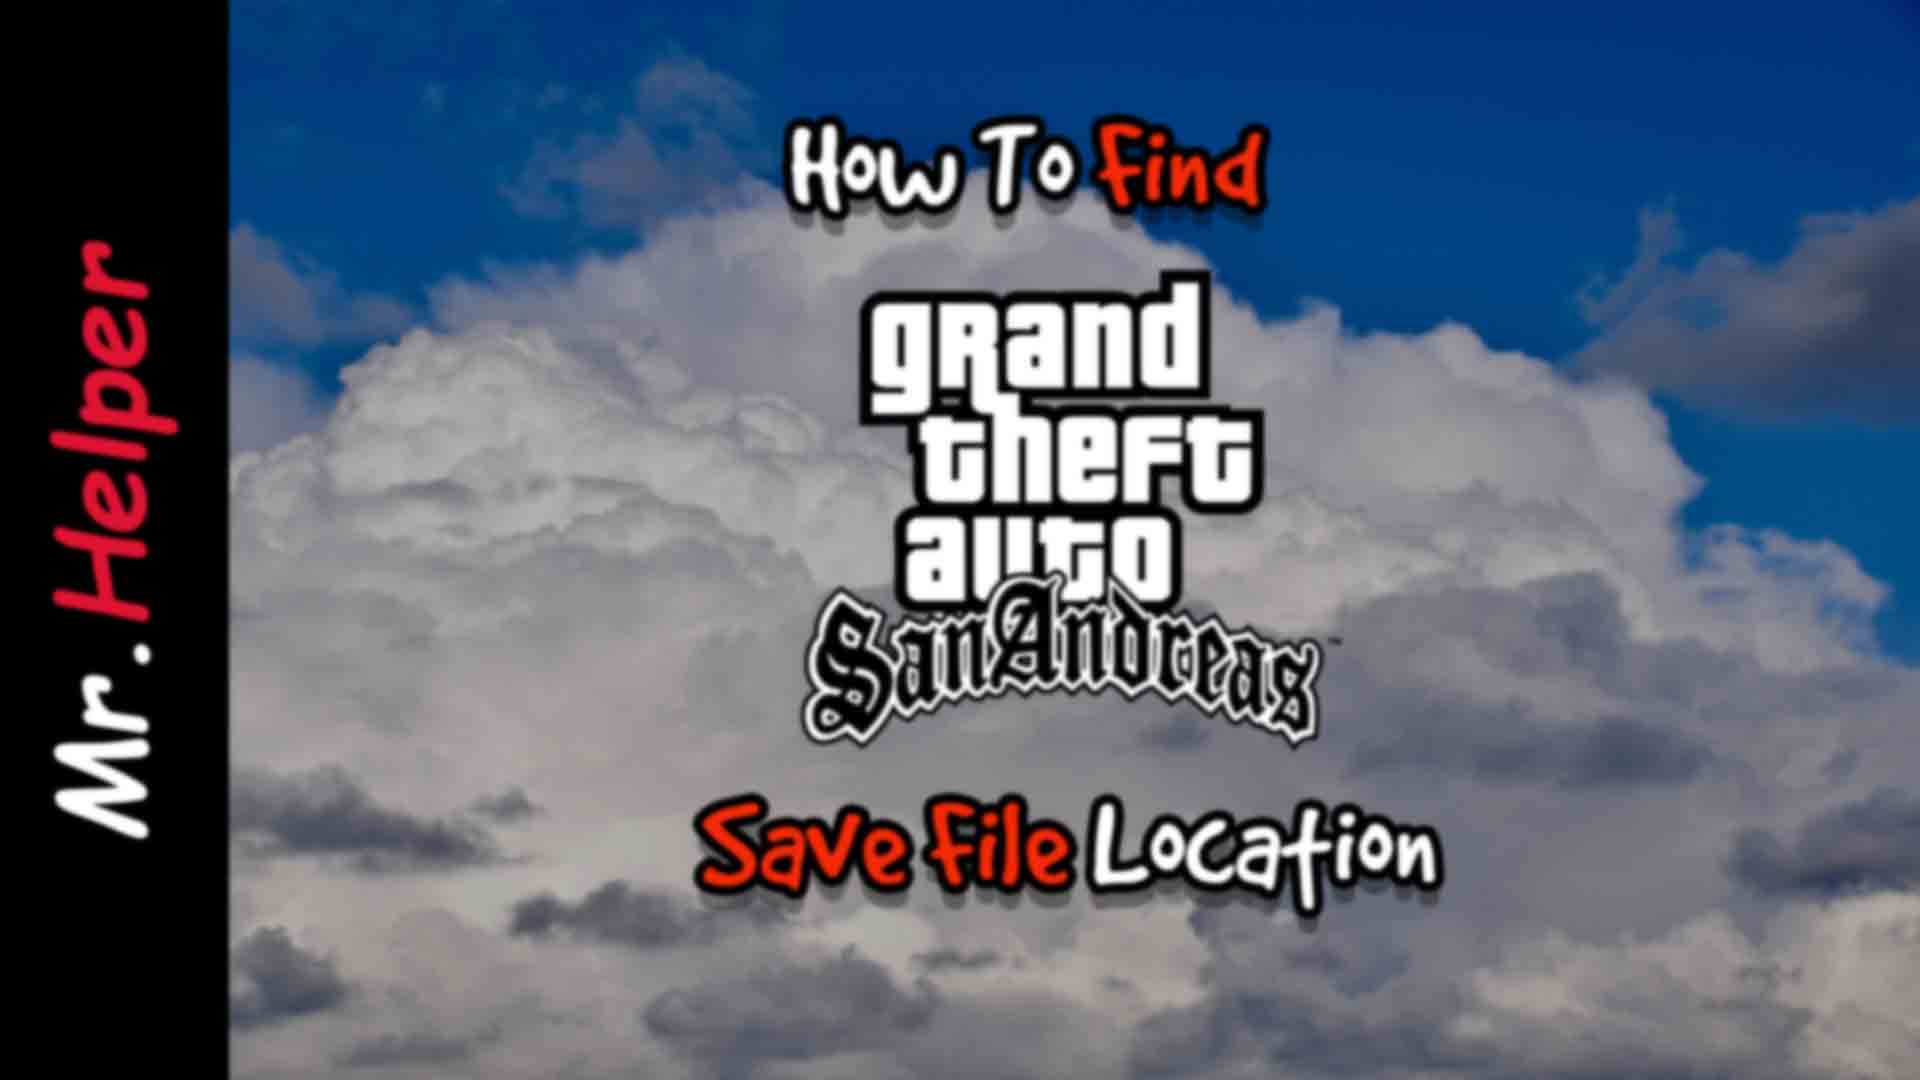 gamehall-org-how-to-find-gta-san-andreas-save-game-file-location-in-windows-pc-featured-image-1837161